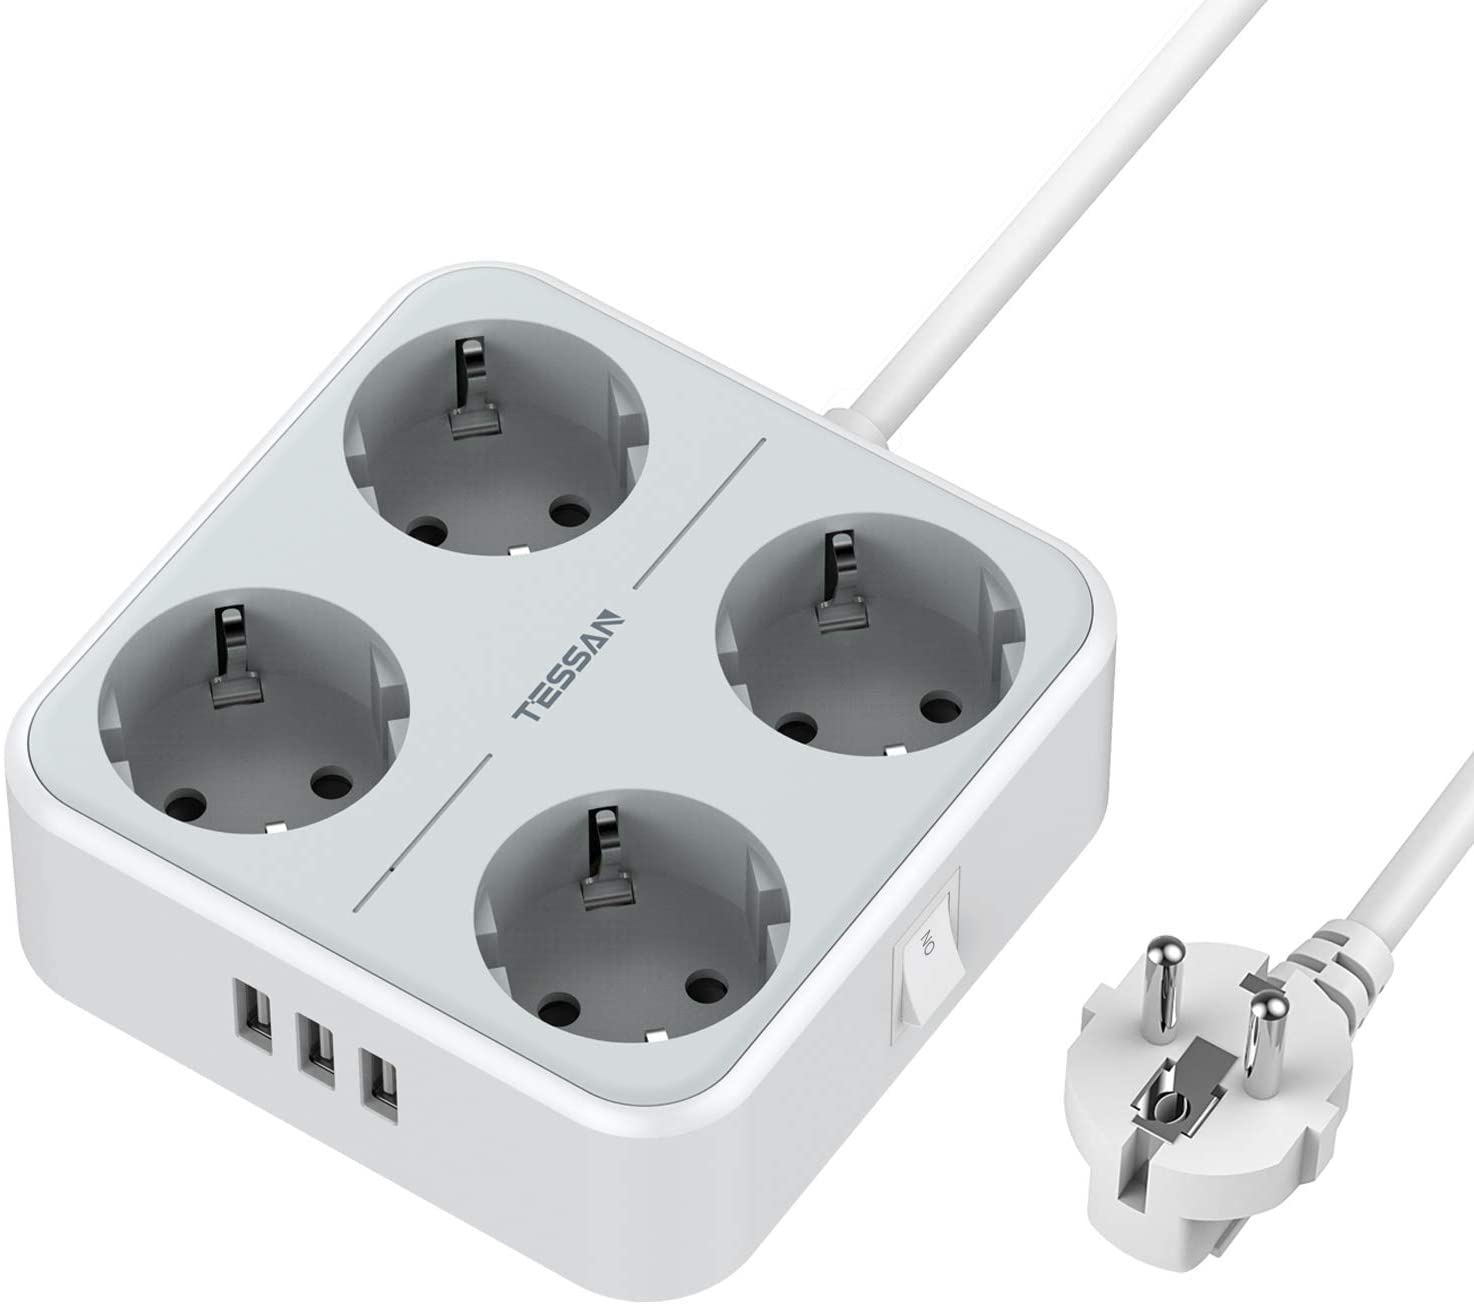 TESSAN-TS-302-DE-2500W-Wired-USB-Socket-Power-Strip-GermanEU-Plug-with-4-AC-Outlets3-USB-Charger-Ada-1937414-7